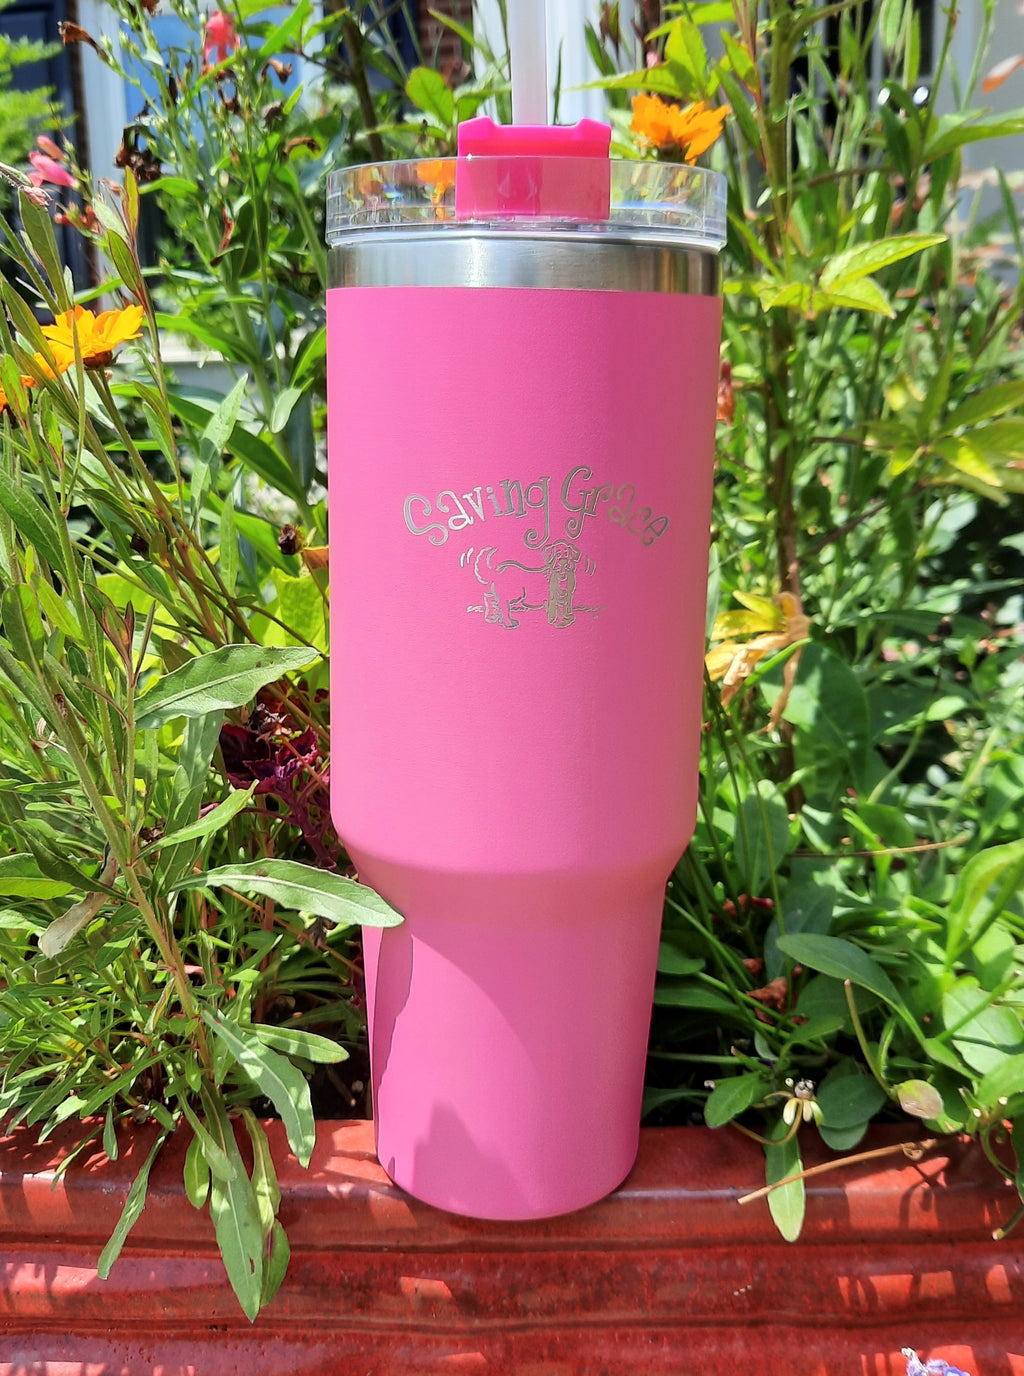 Stanley tumbler nectar pink and Shrub green stainless steel straw cup